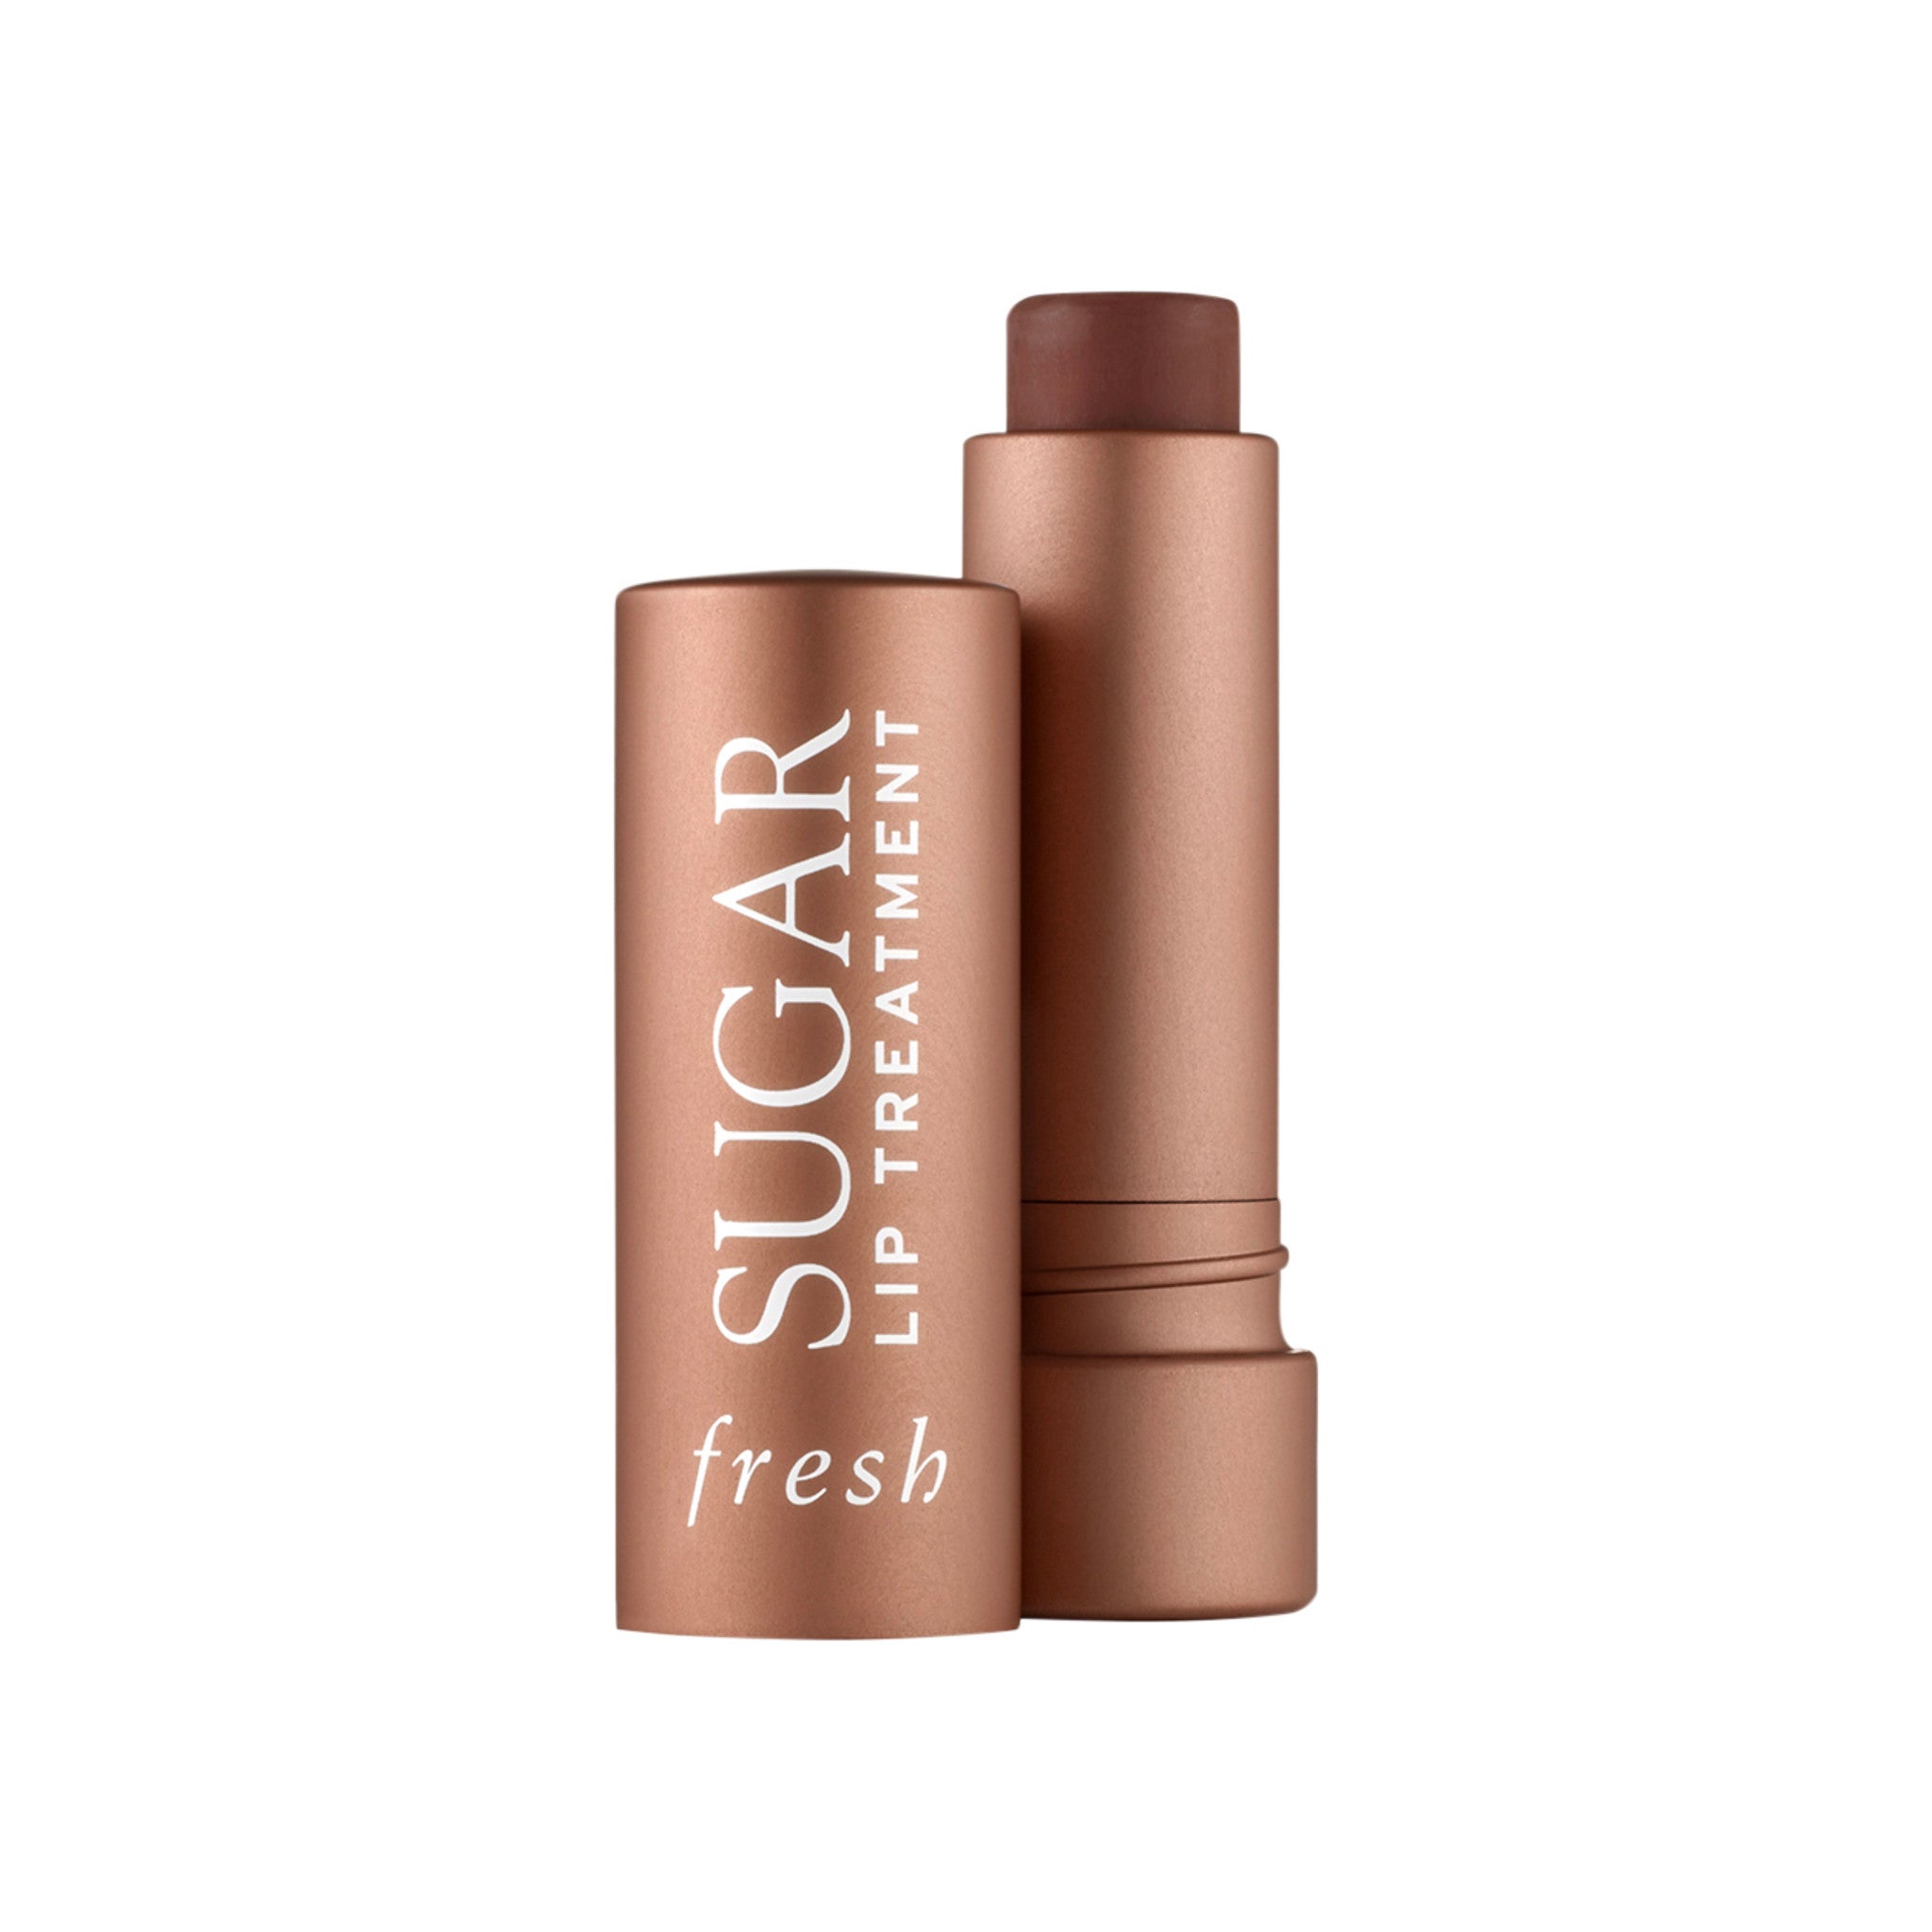 Fresh Sugar Lip Balm Color/Shade variant: Cocoa main image. This product is in the color brown